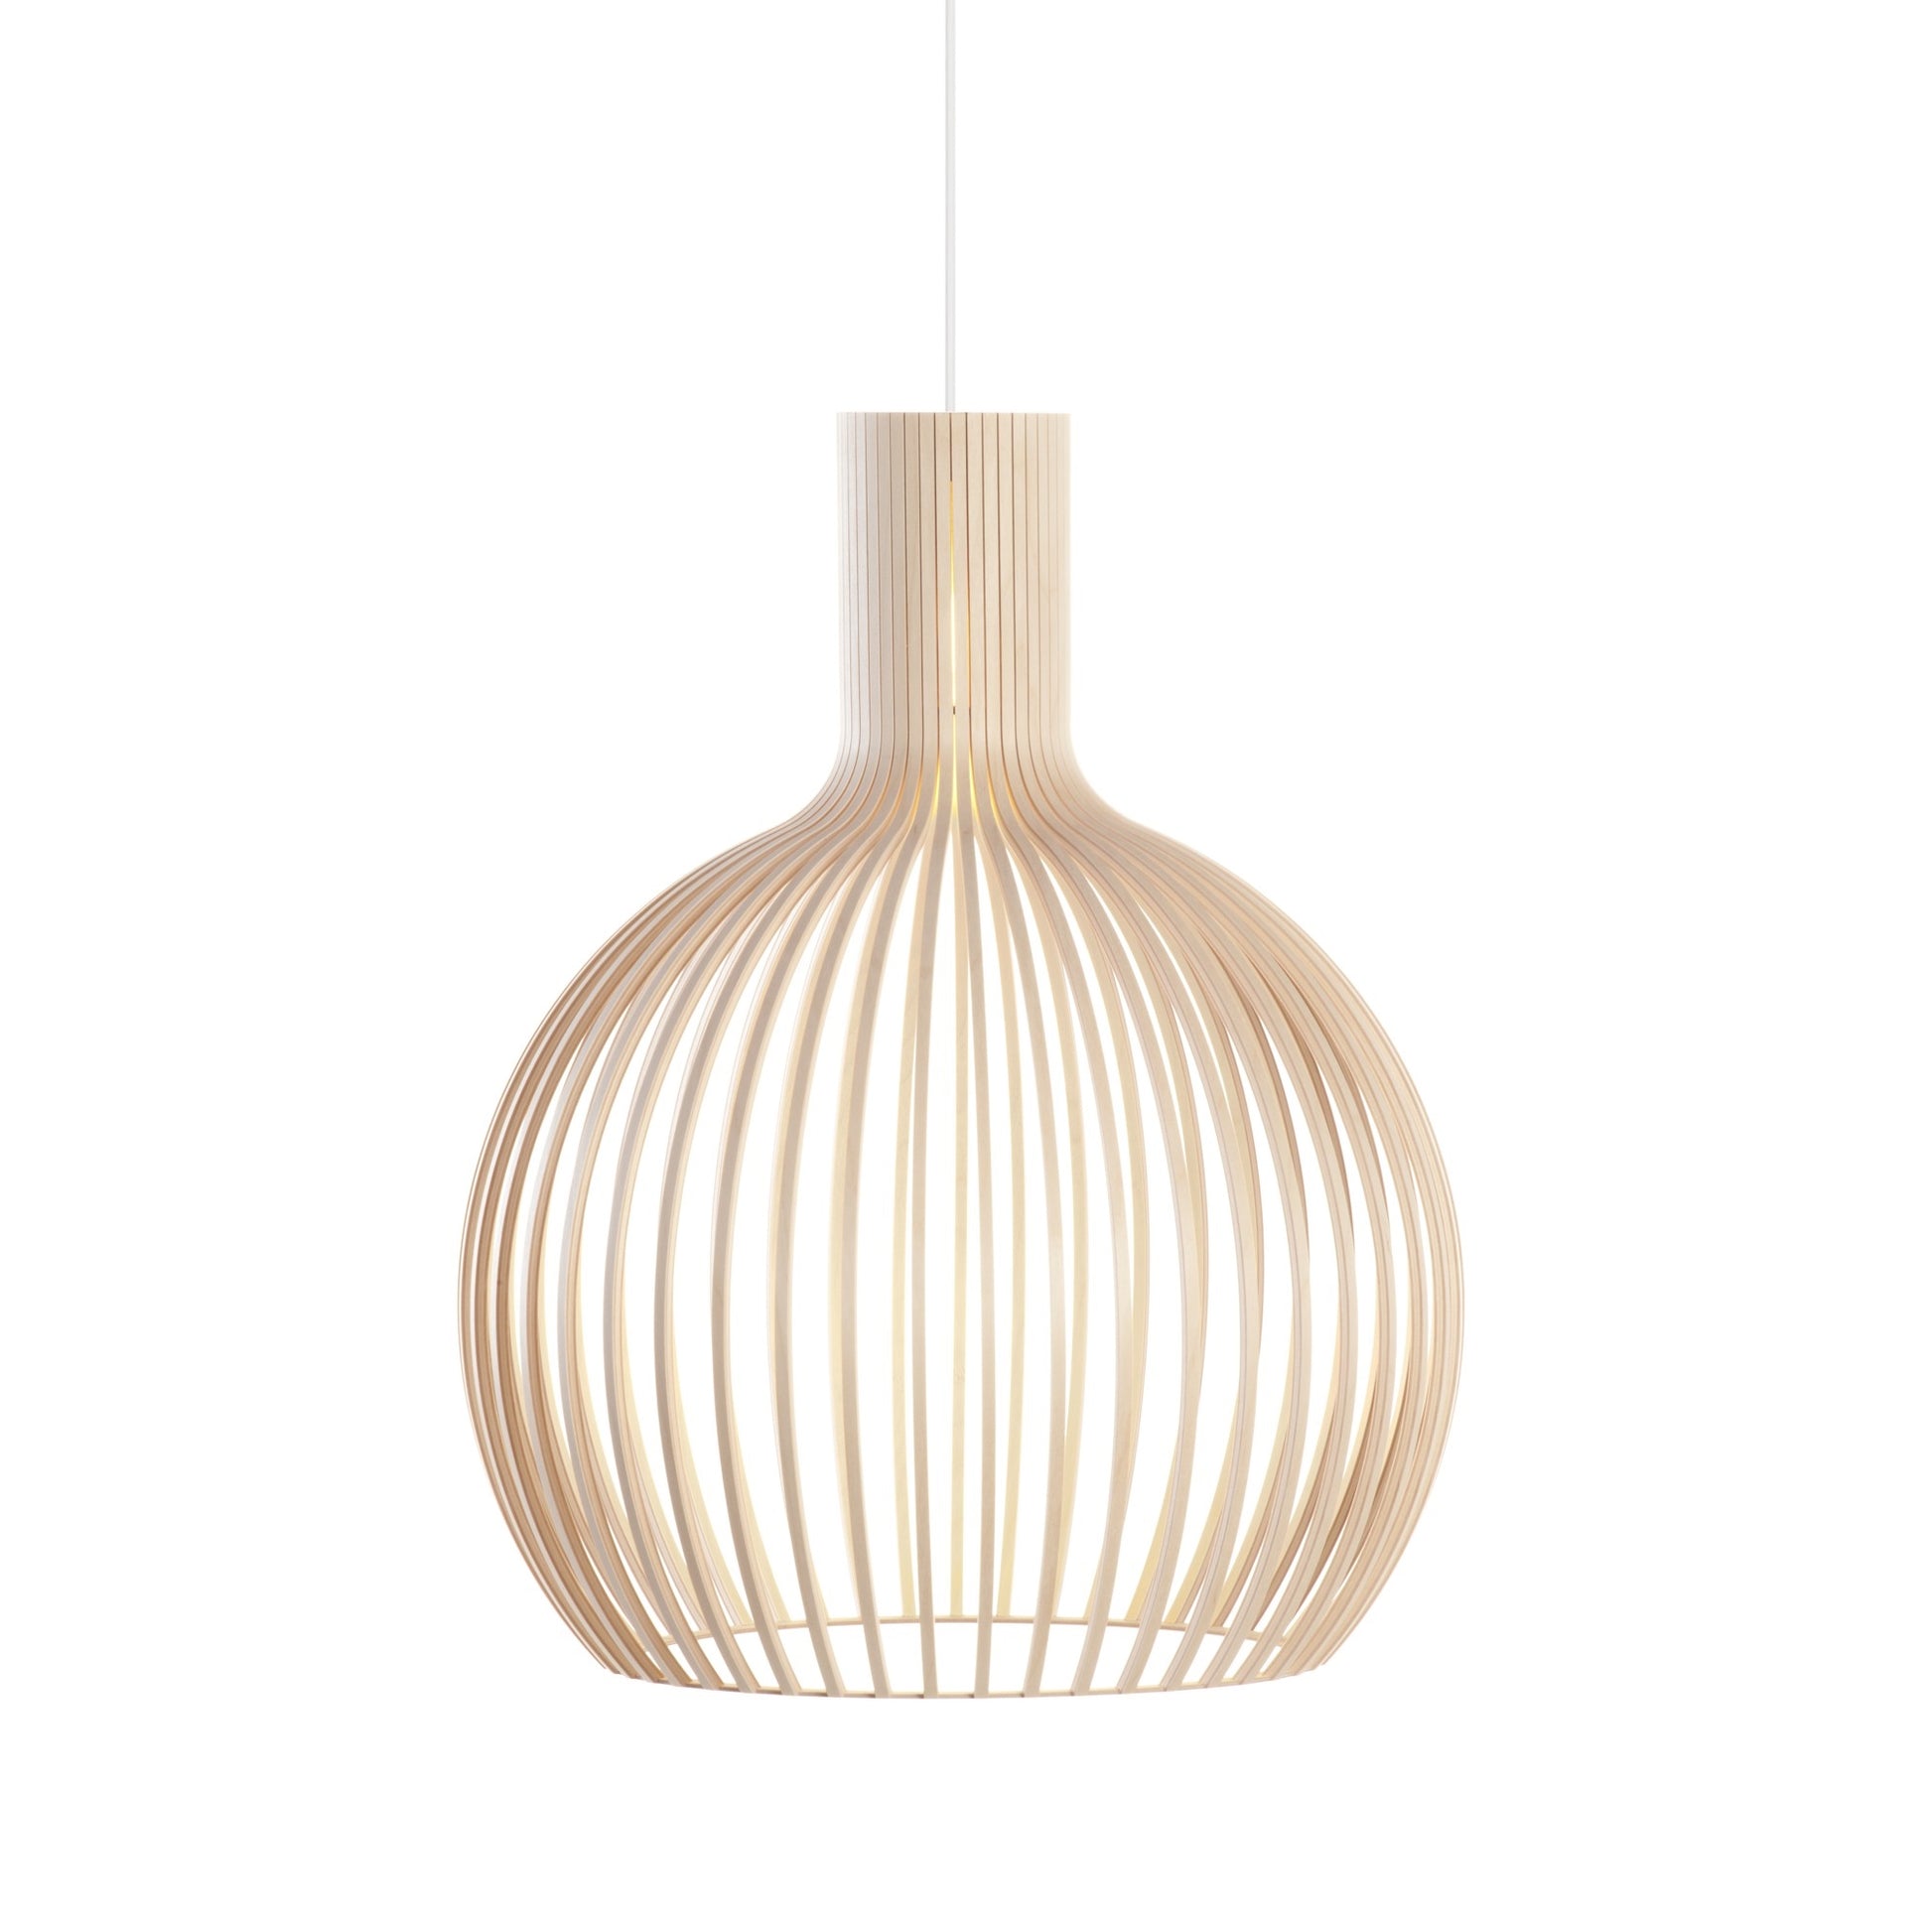 Octo 4240 Pendant Lamp by Secto #Birch